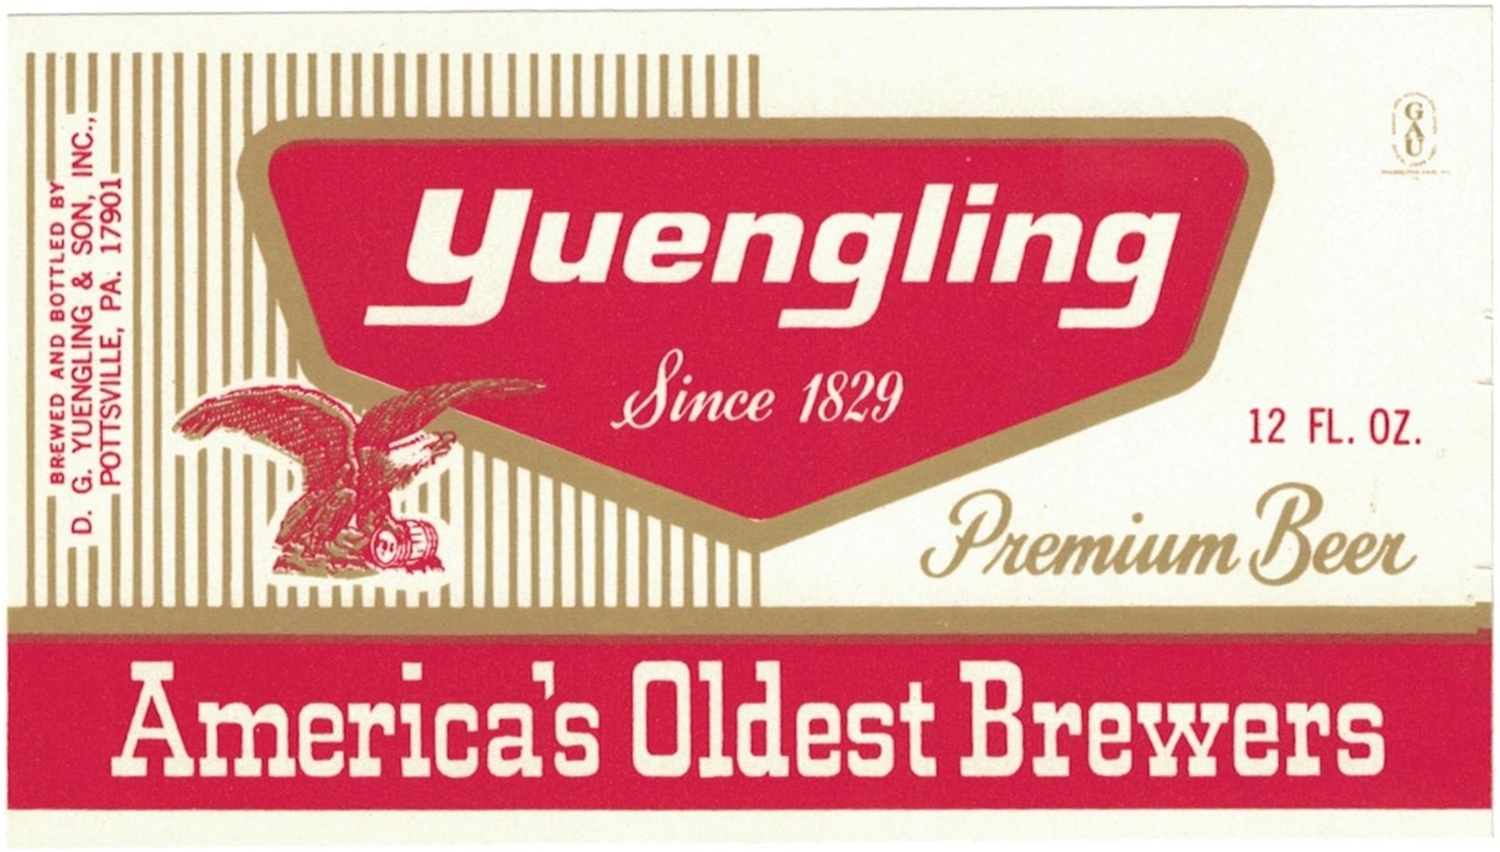 Yuengling Premium Beer America's Oldest Brewer 12 oz Label